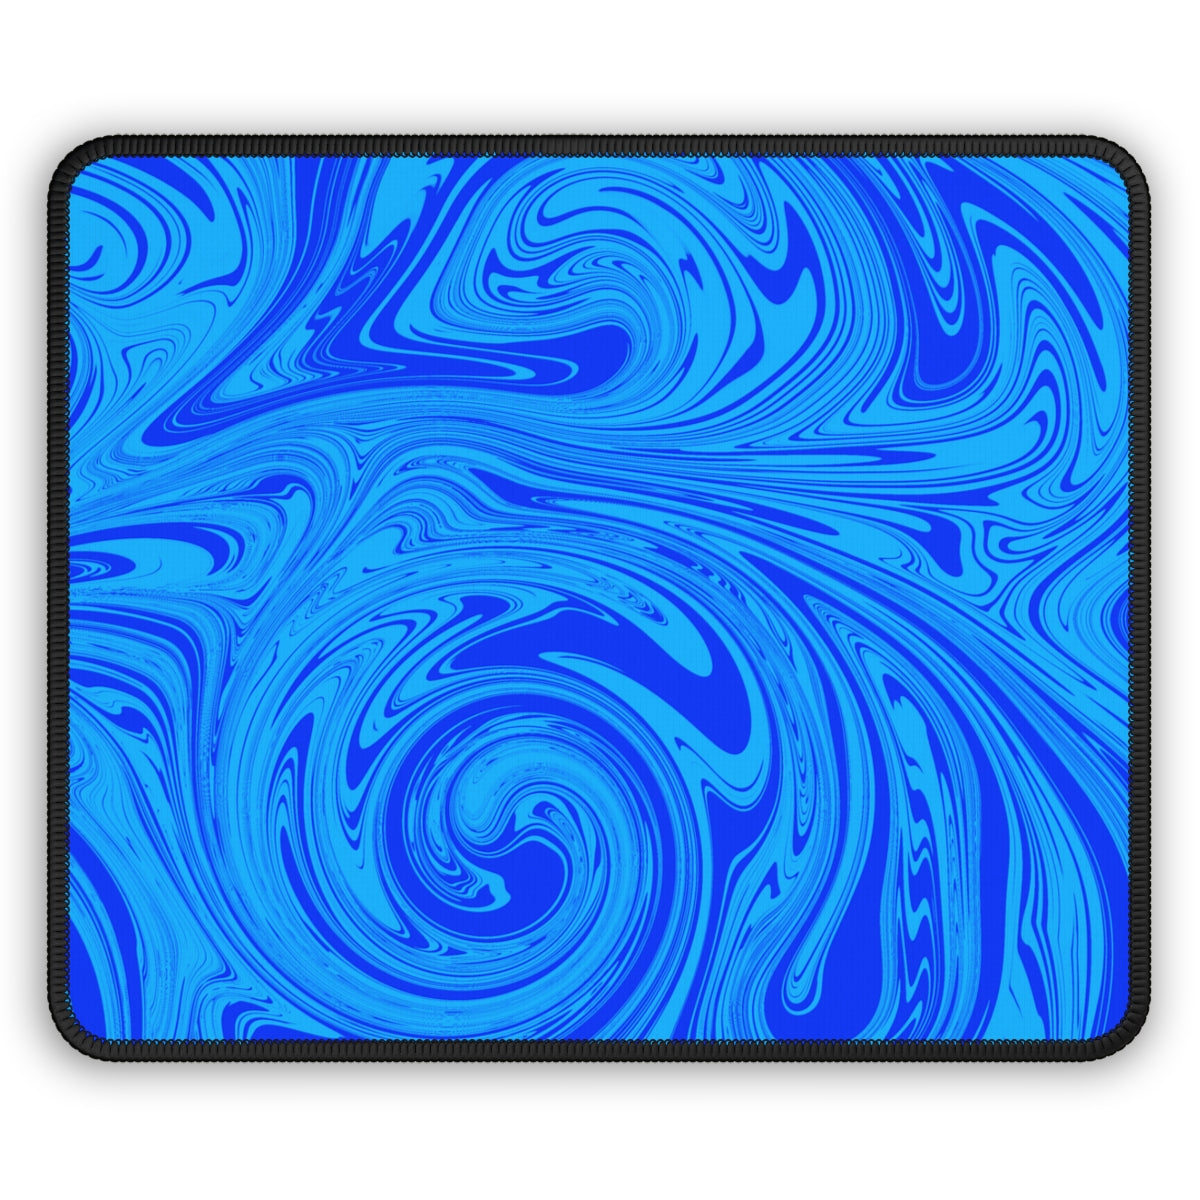 Blue Swirl Gaming Mouse Pad - Desk Cookies